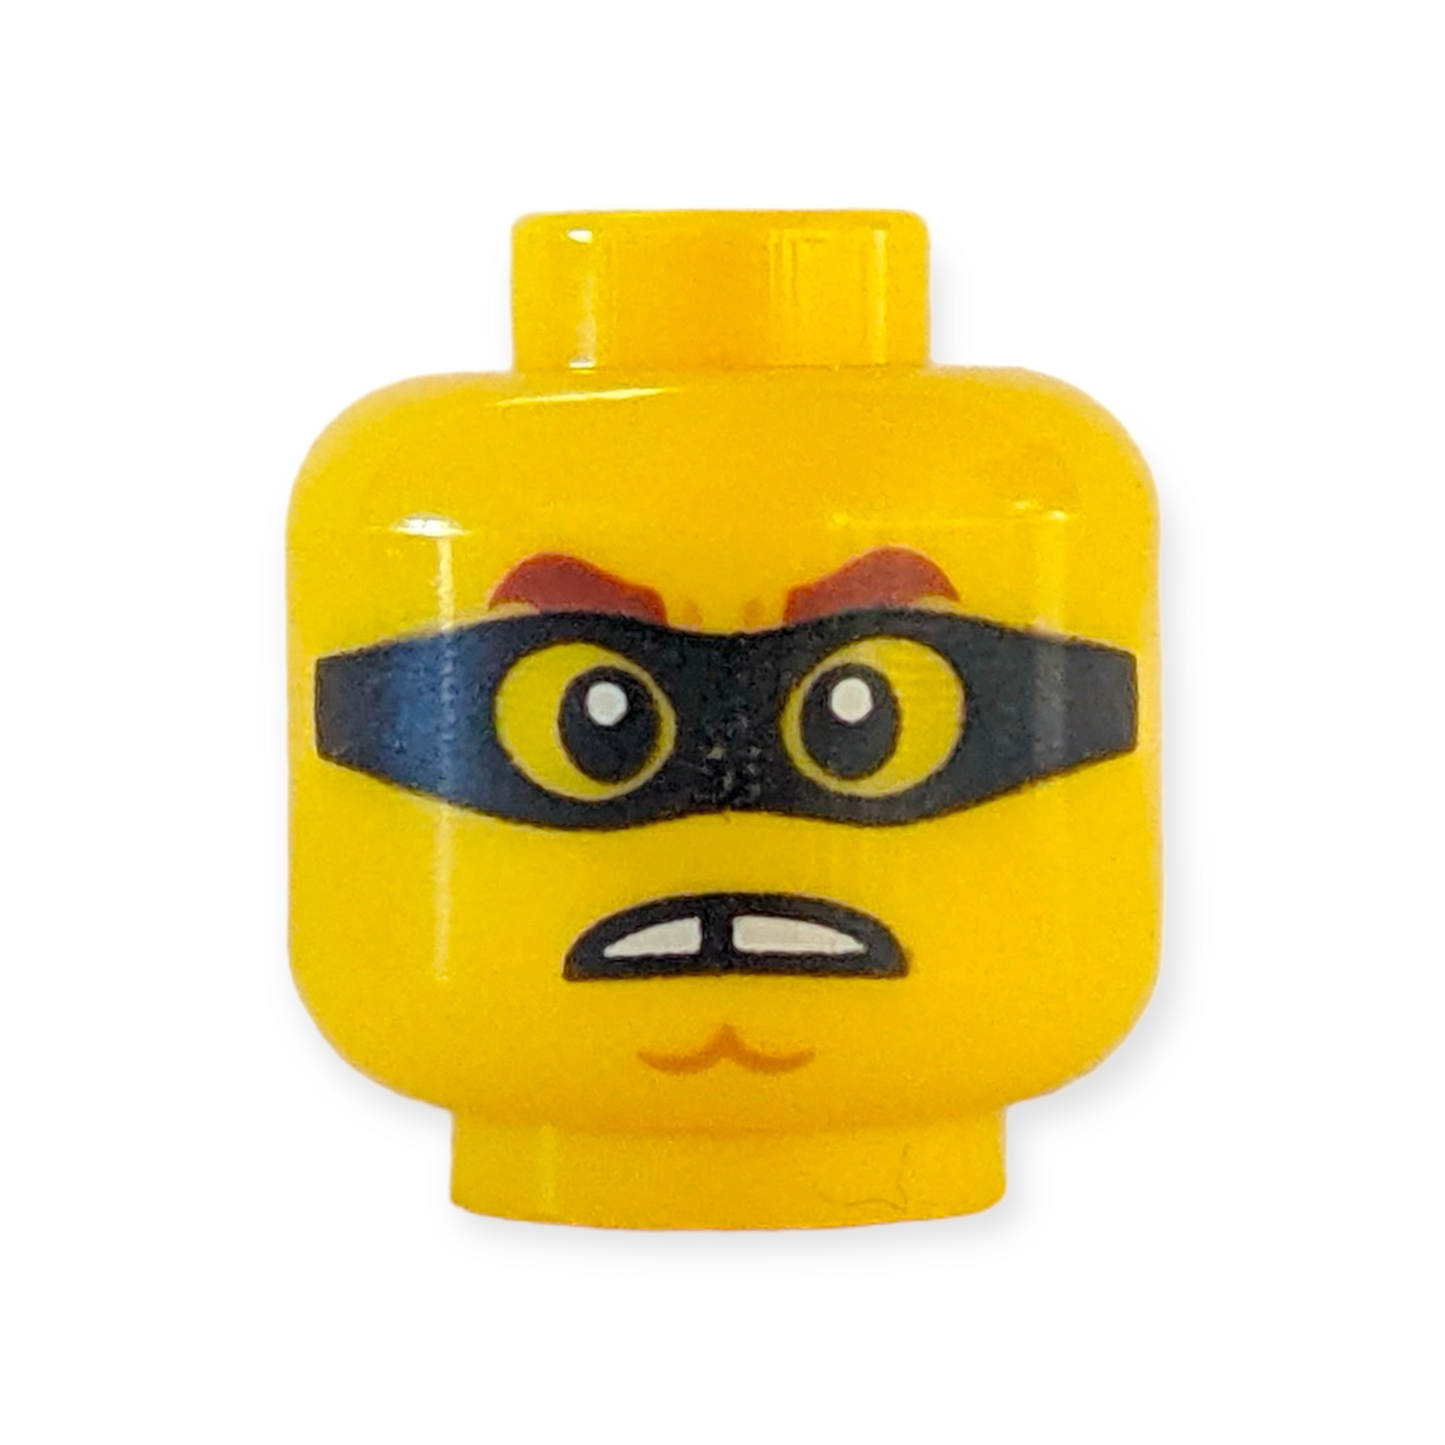 LEGO Head - 3163 Dual Sided Reddish Brown Thick Eyebrows, Chin Dimple, Open Mouth Smile